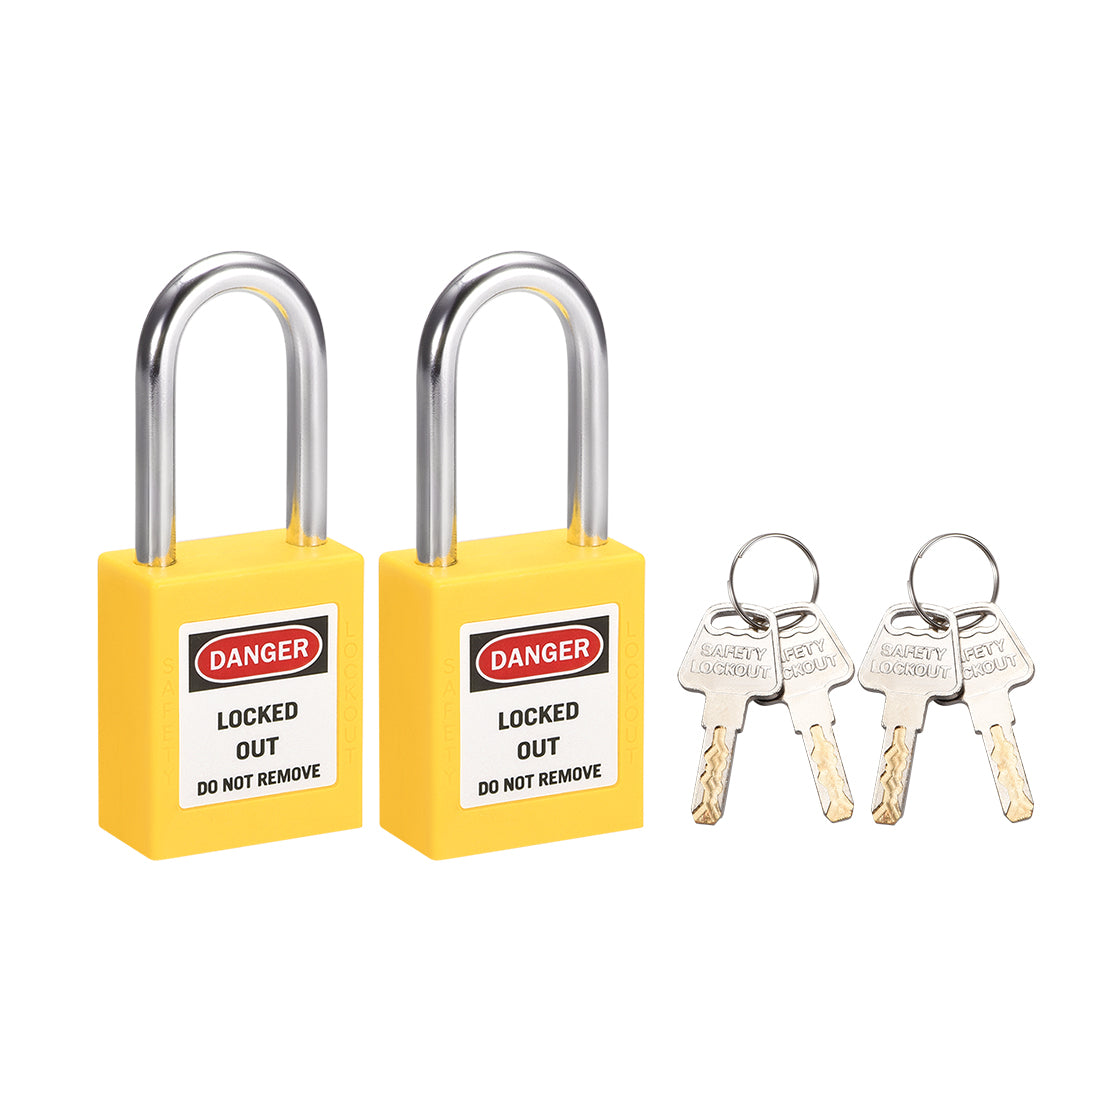 uxcell Uxcell Lockout Tagout Safety Padlock 38mm Steel Shackle Keyed Different Yellow 2Pcs